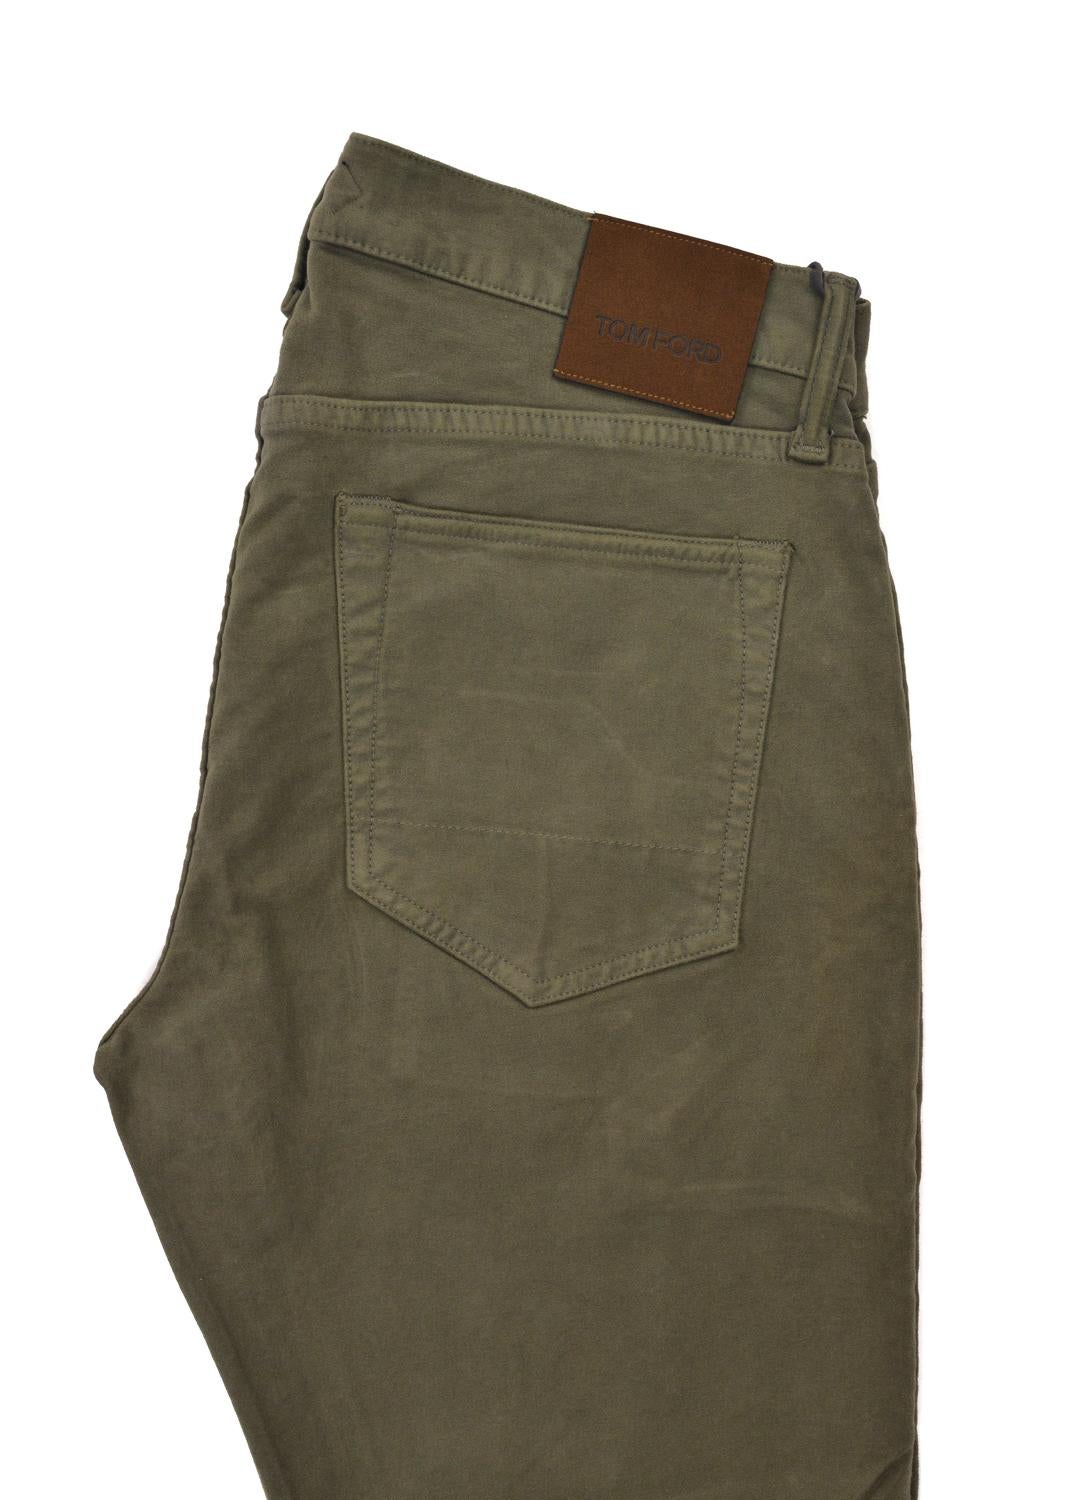 Bask in the appreciation for aesthetics in your light olive Tom Ford Jeans. These pants feature a light olive green color, smooth cotton texture, and updated slim fit. You can pair these trousers with a slim fit t shirt or classic white button down